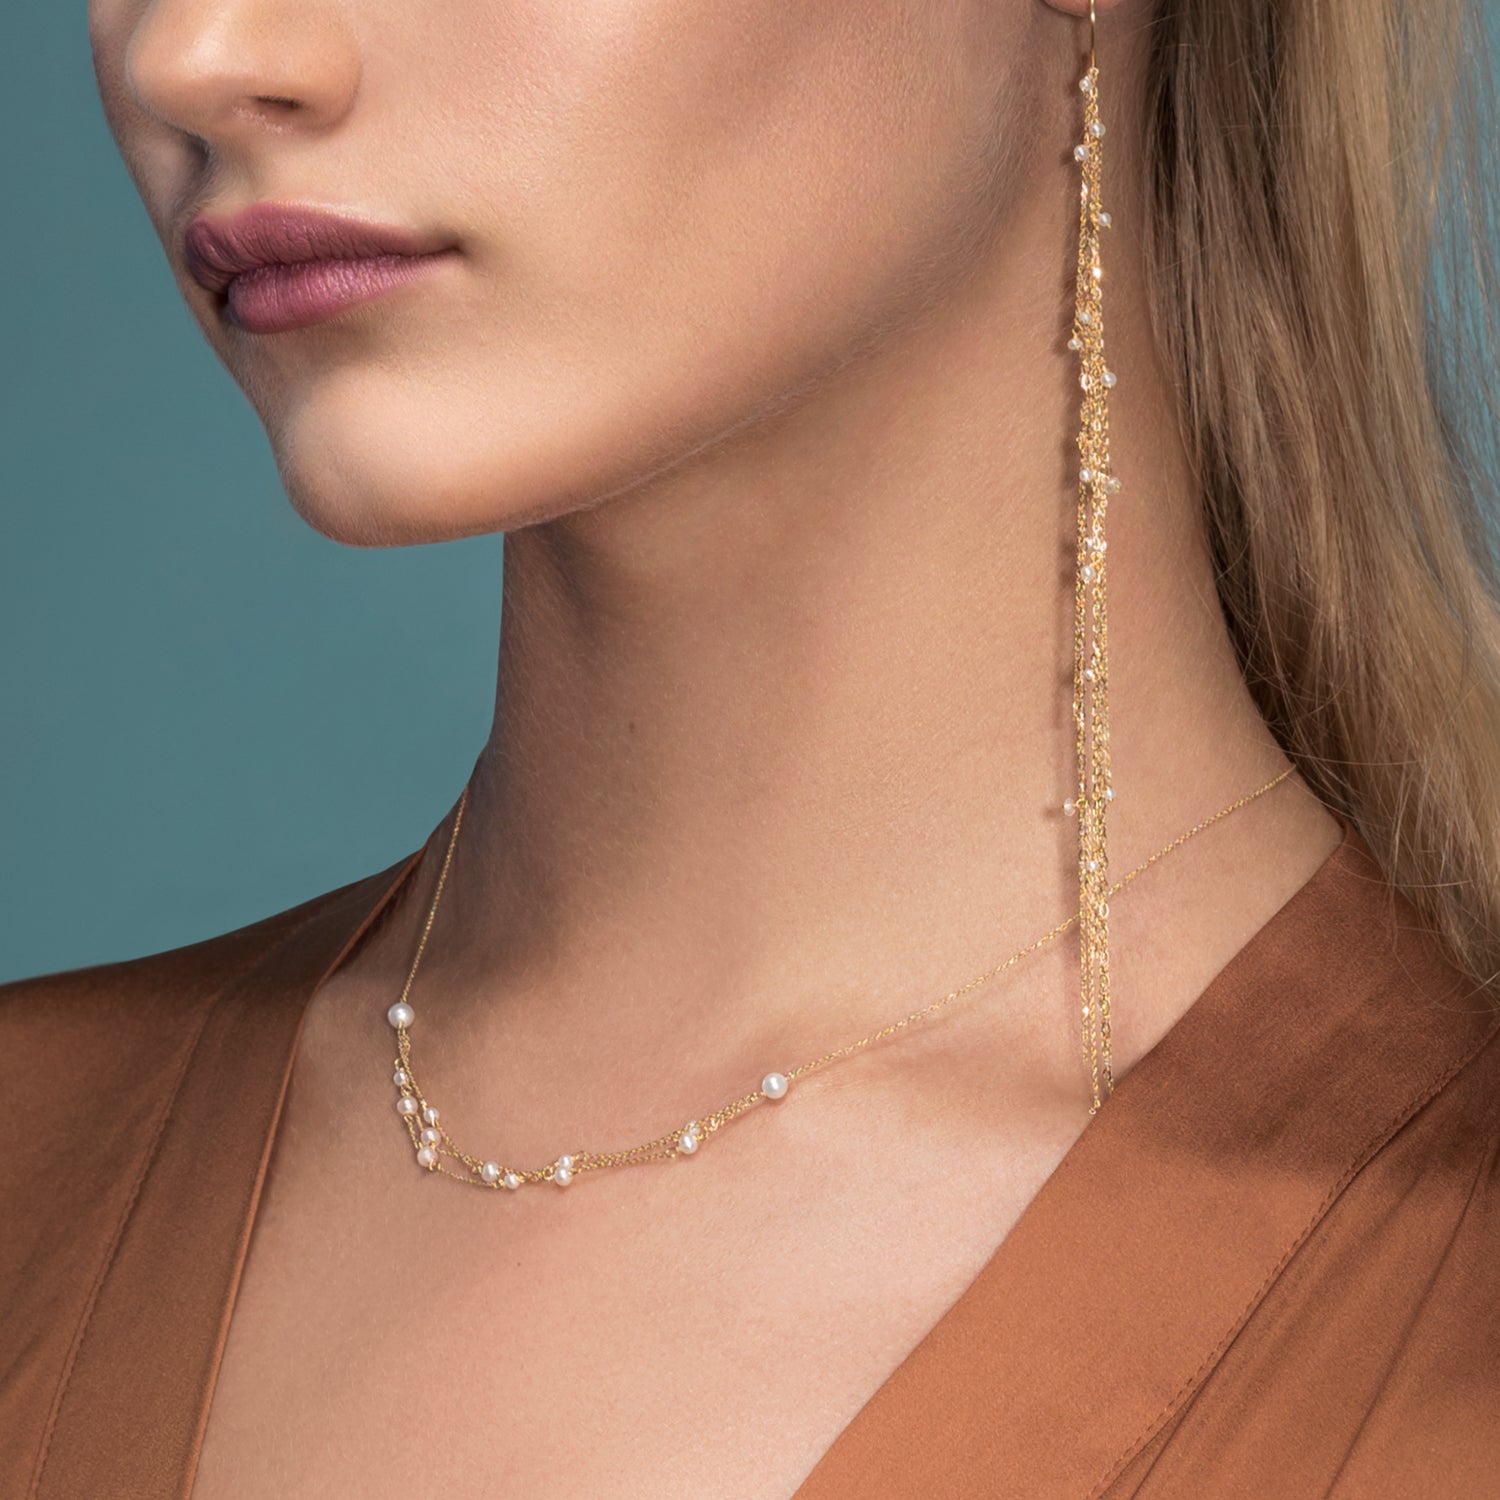 18ct yellow gold fine chain necklace with 3 strand layered sections with fresh water pearls